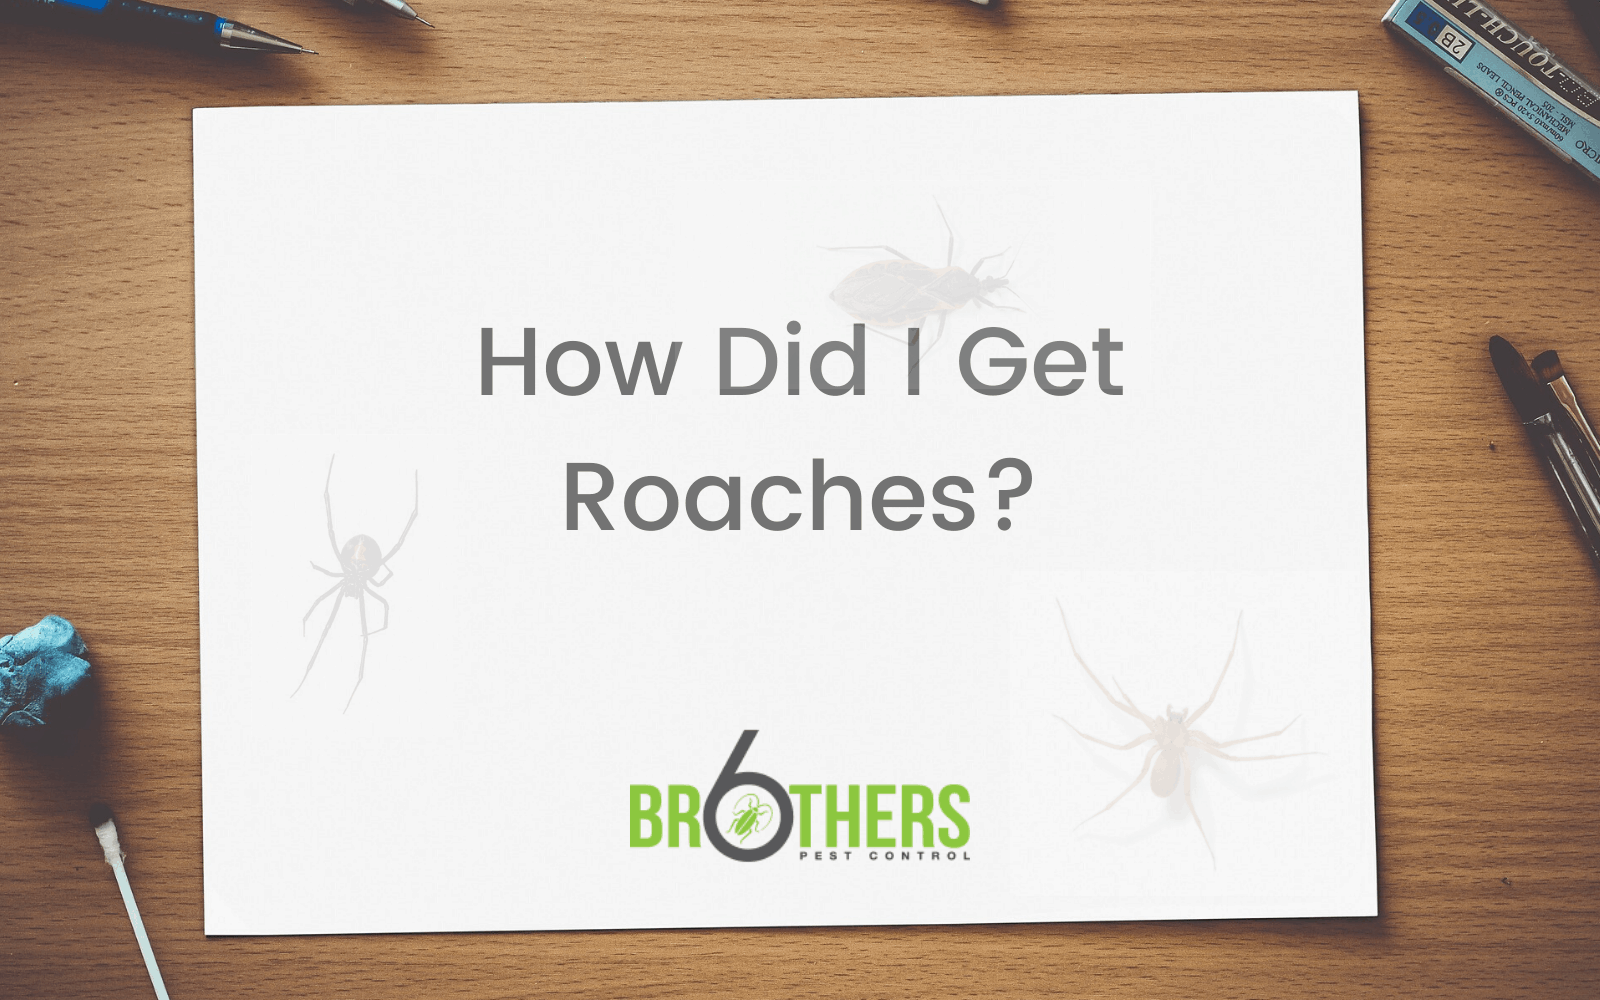 How Did I Get Roaches?